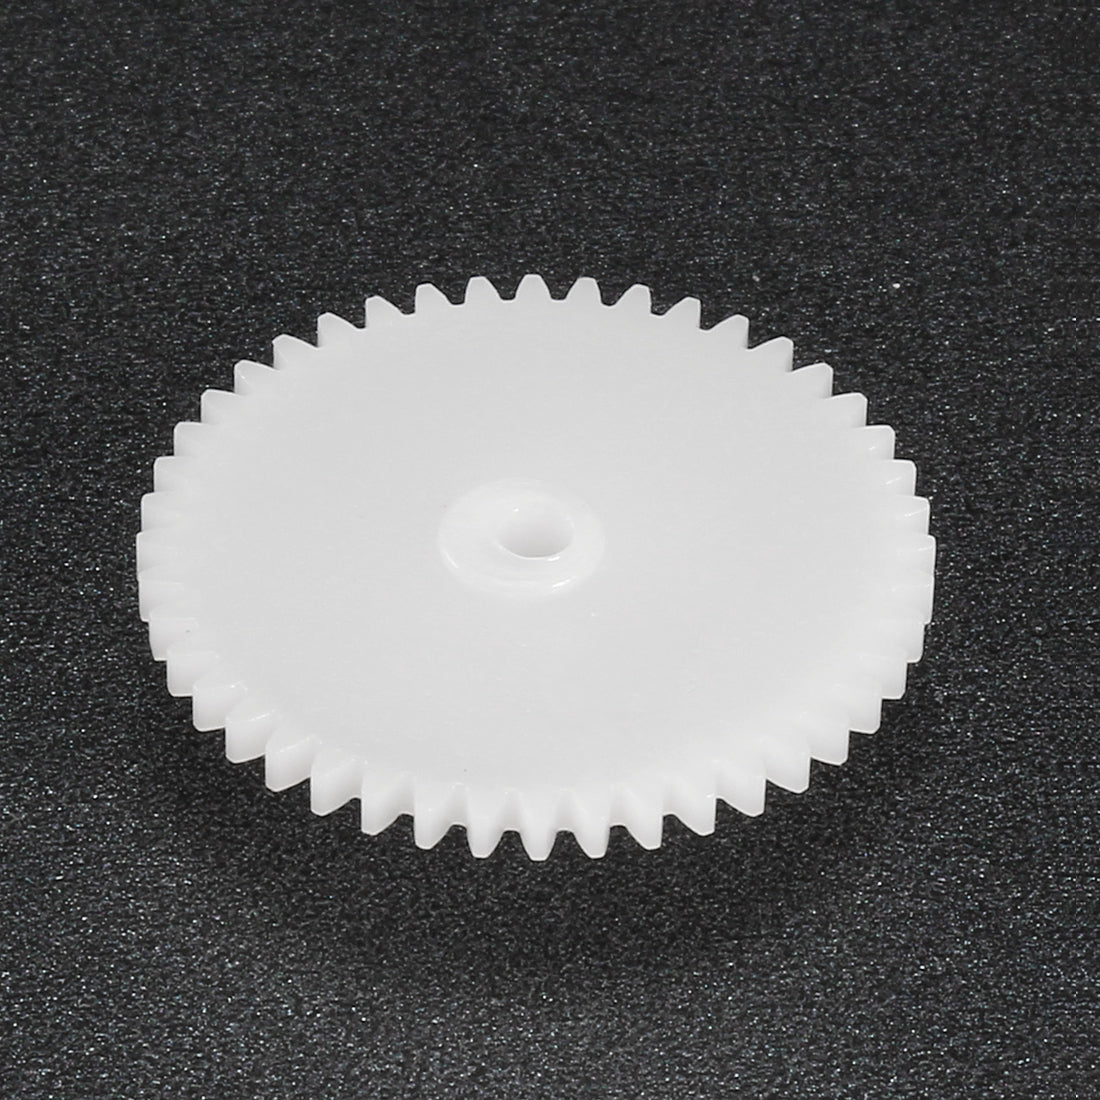 uxcell Uxcell 10Pcs 36102B Plastic Gear Accessories with 36 Teeth for DIY Car Robot Motor